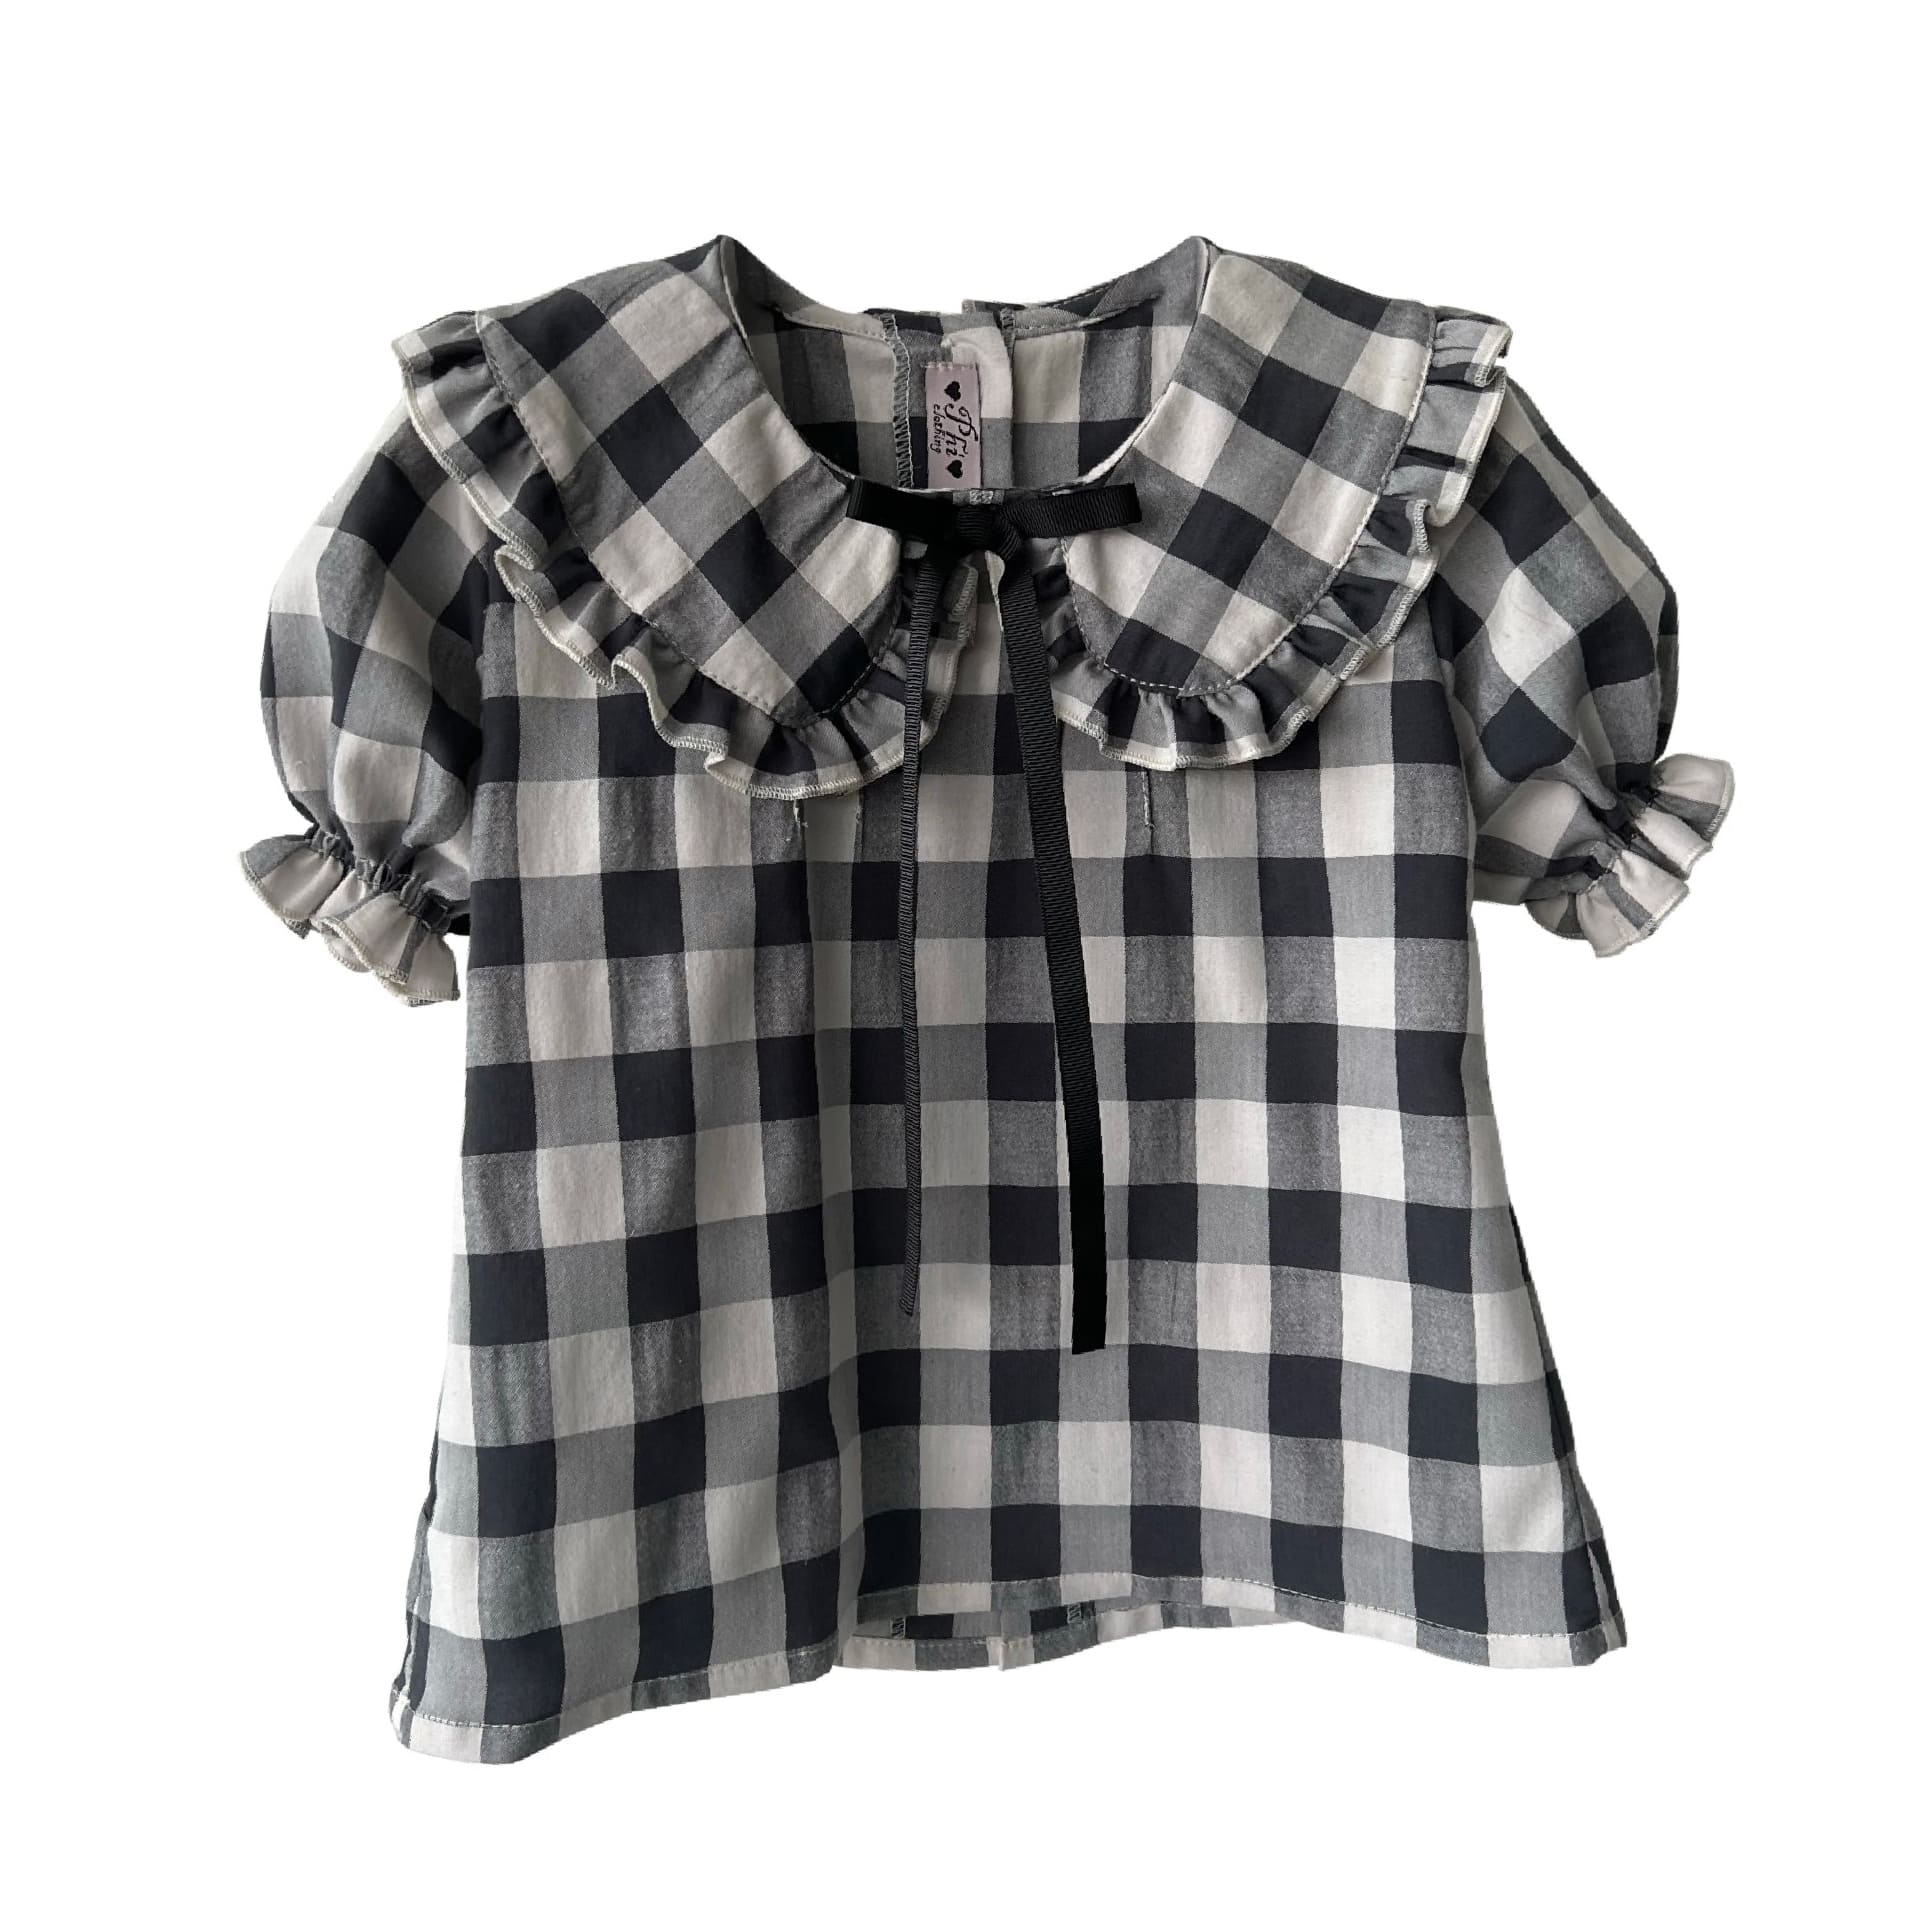 Black and white check blouse